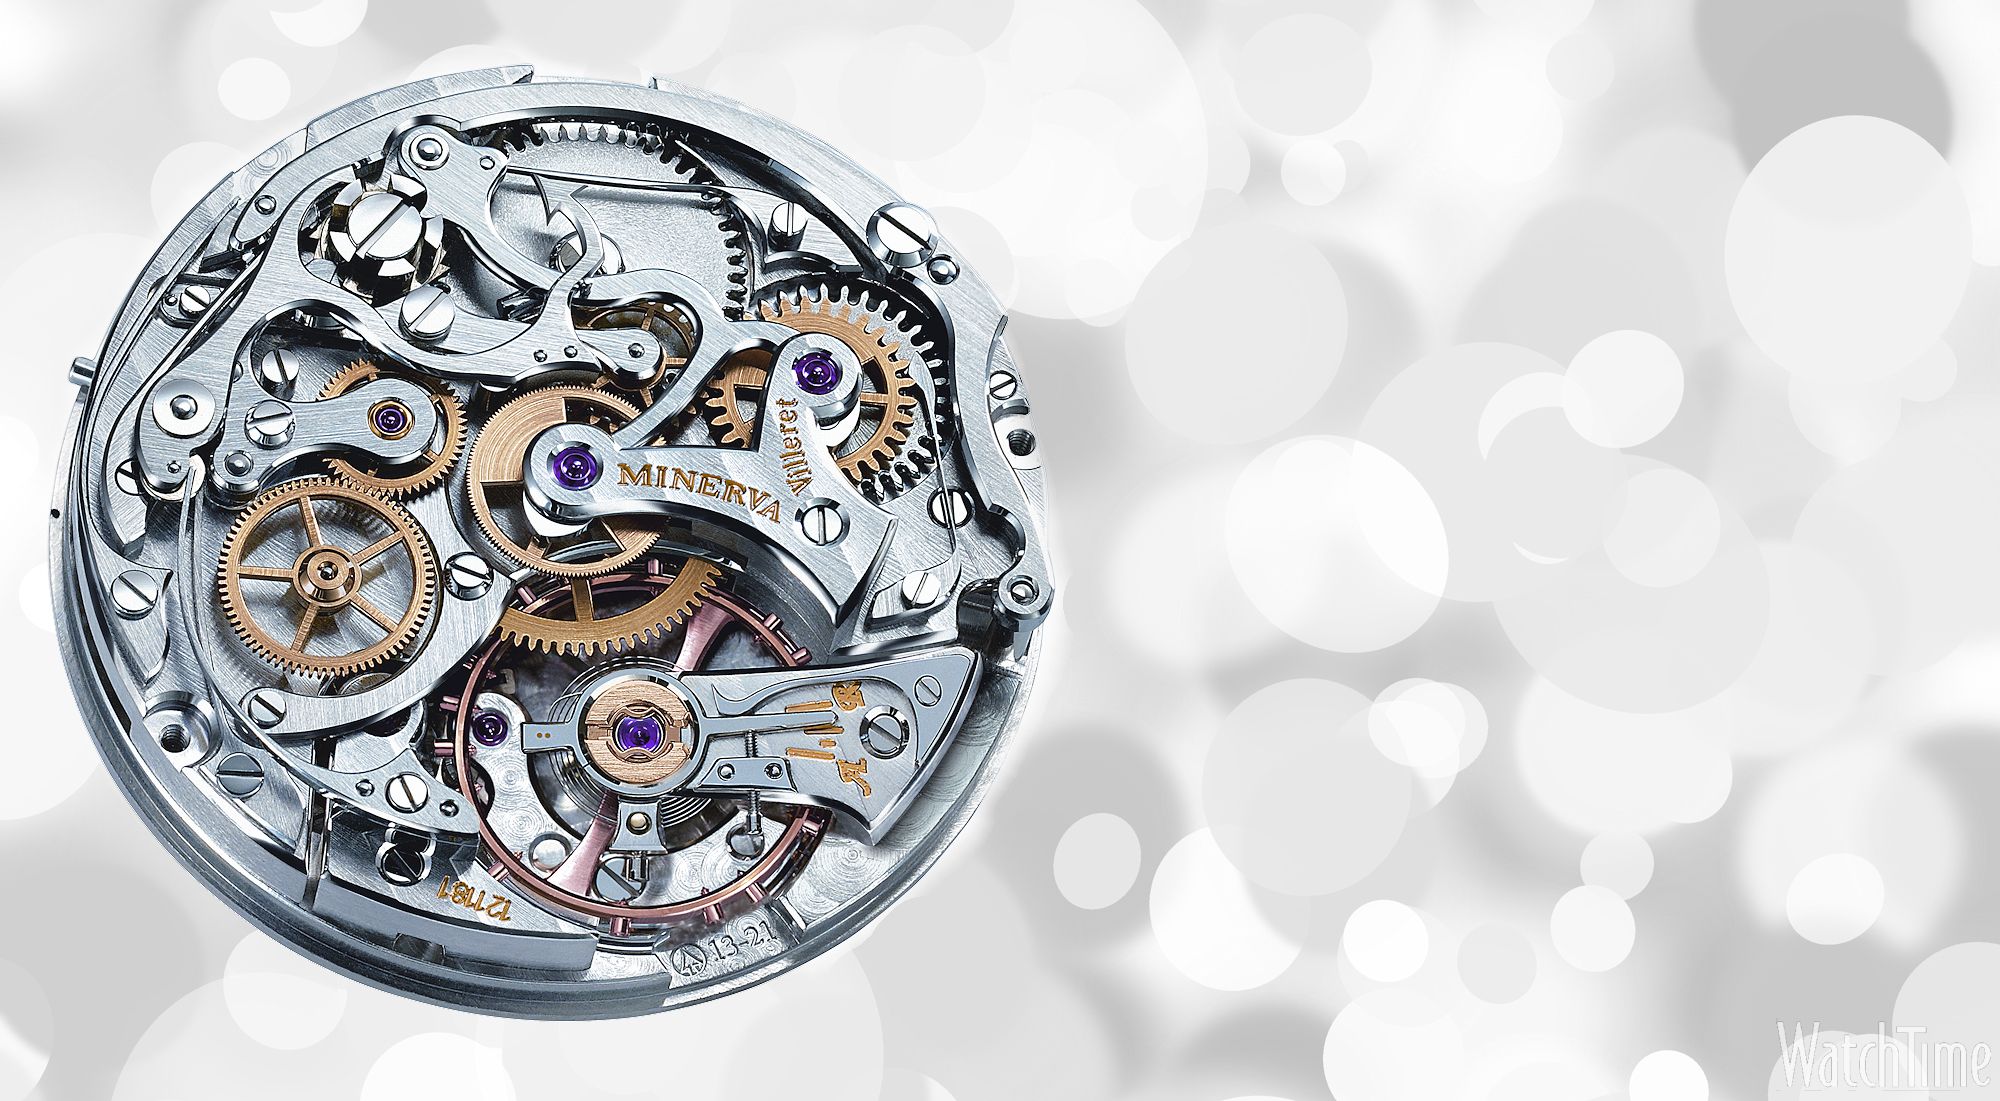 Watch Wallpaper: 8 Montblanc Watches and Movements. WatchTime's No.1 Watch Magazine